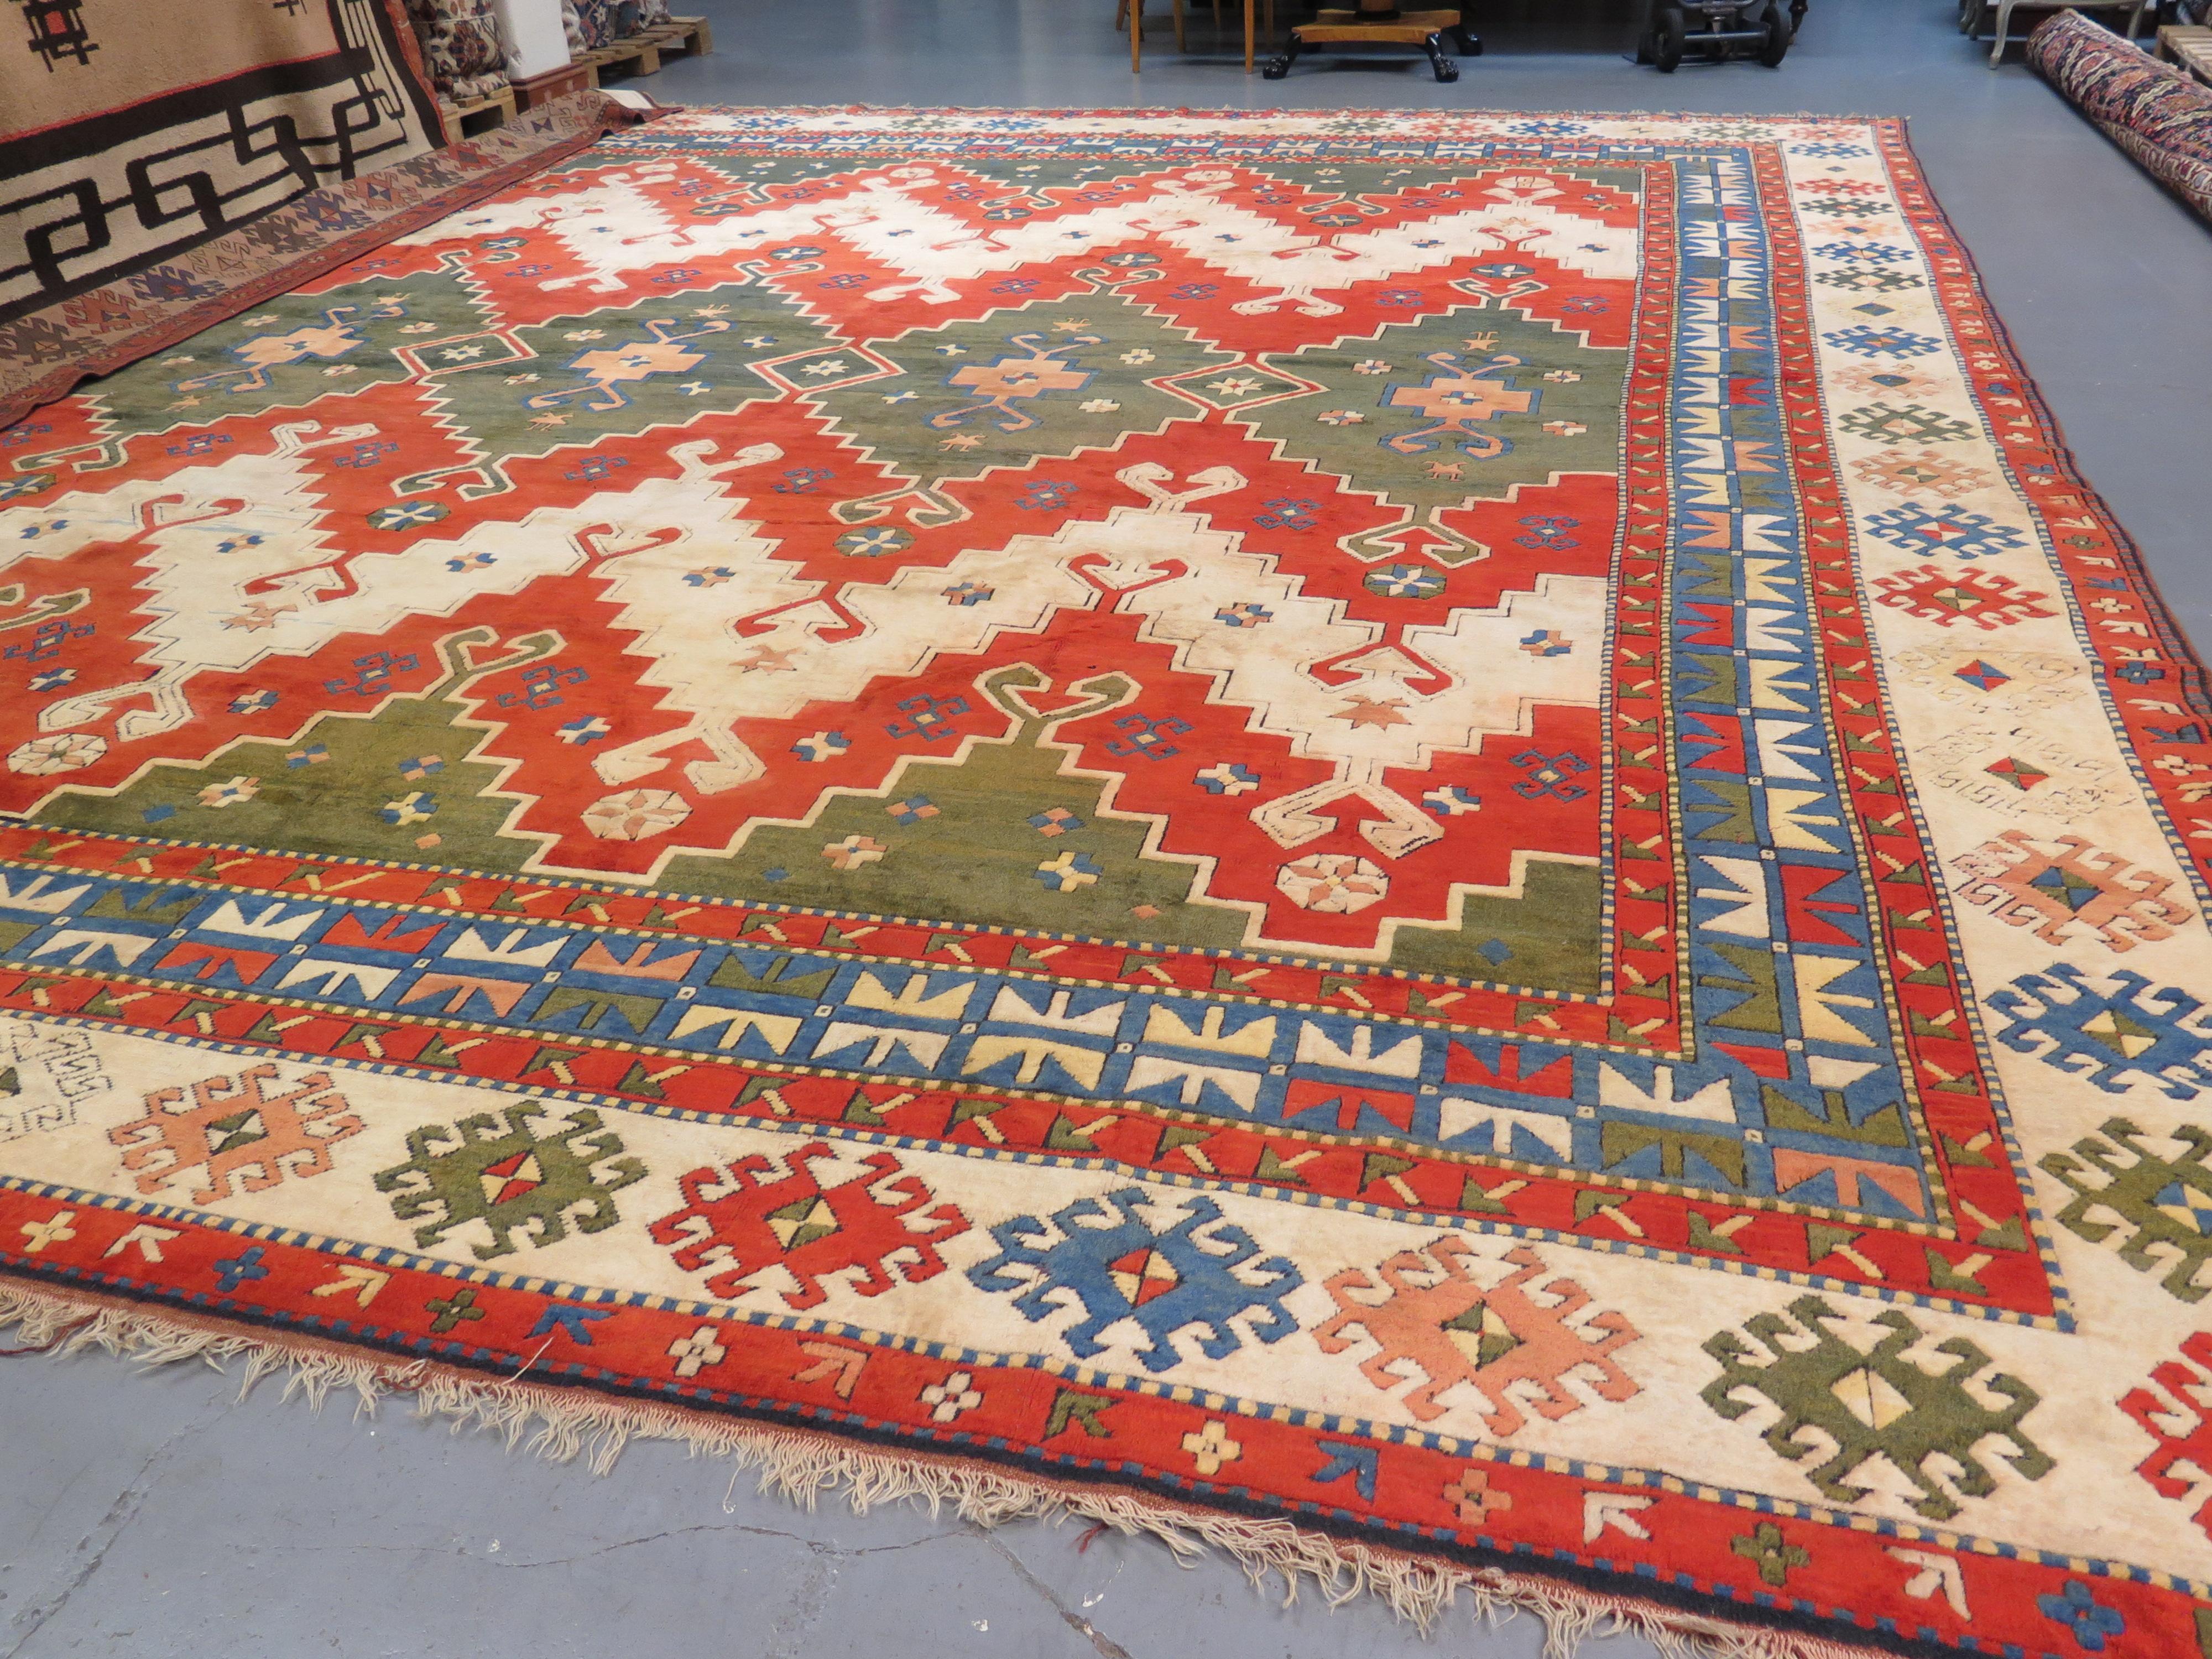 Anatolia, the western region of Turkey, has a long-standing rug-weaving tradition, dating at least as far back as the 13th Century. As the explorer Marco Polo once wrote, ‘Here they make the most beautiful silks and carpets, and in the most